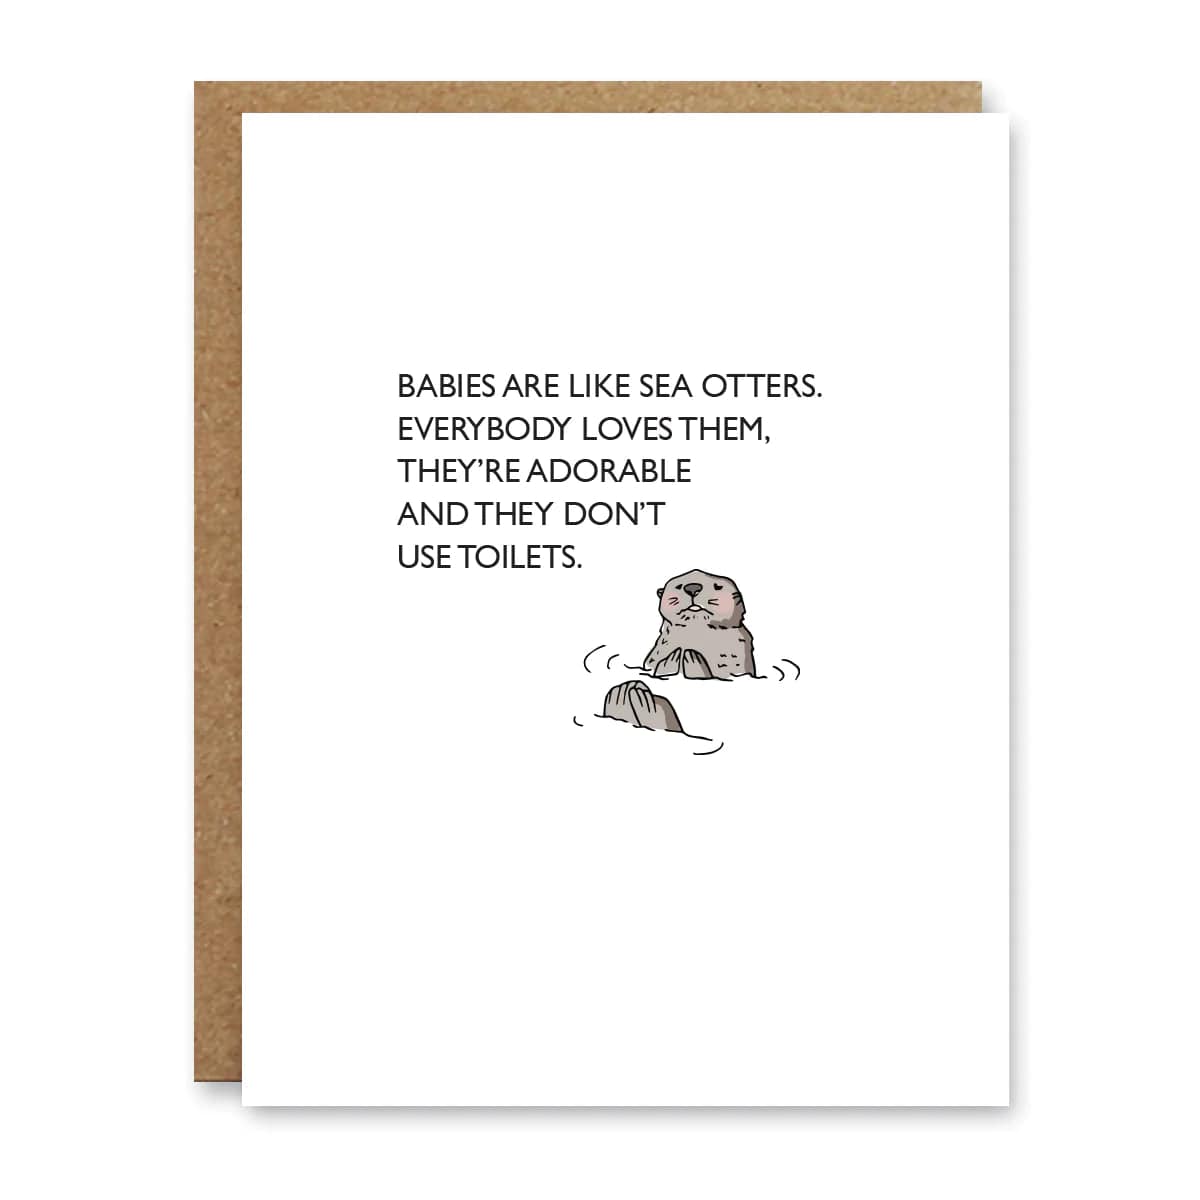 Boo To You Greeting Cards greeting card Boo To You 'Sea Otter' Greeting Card